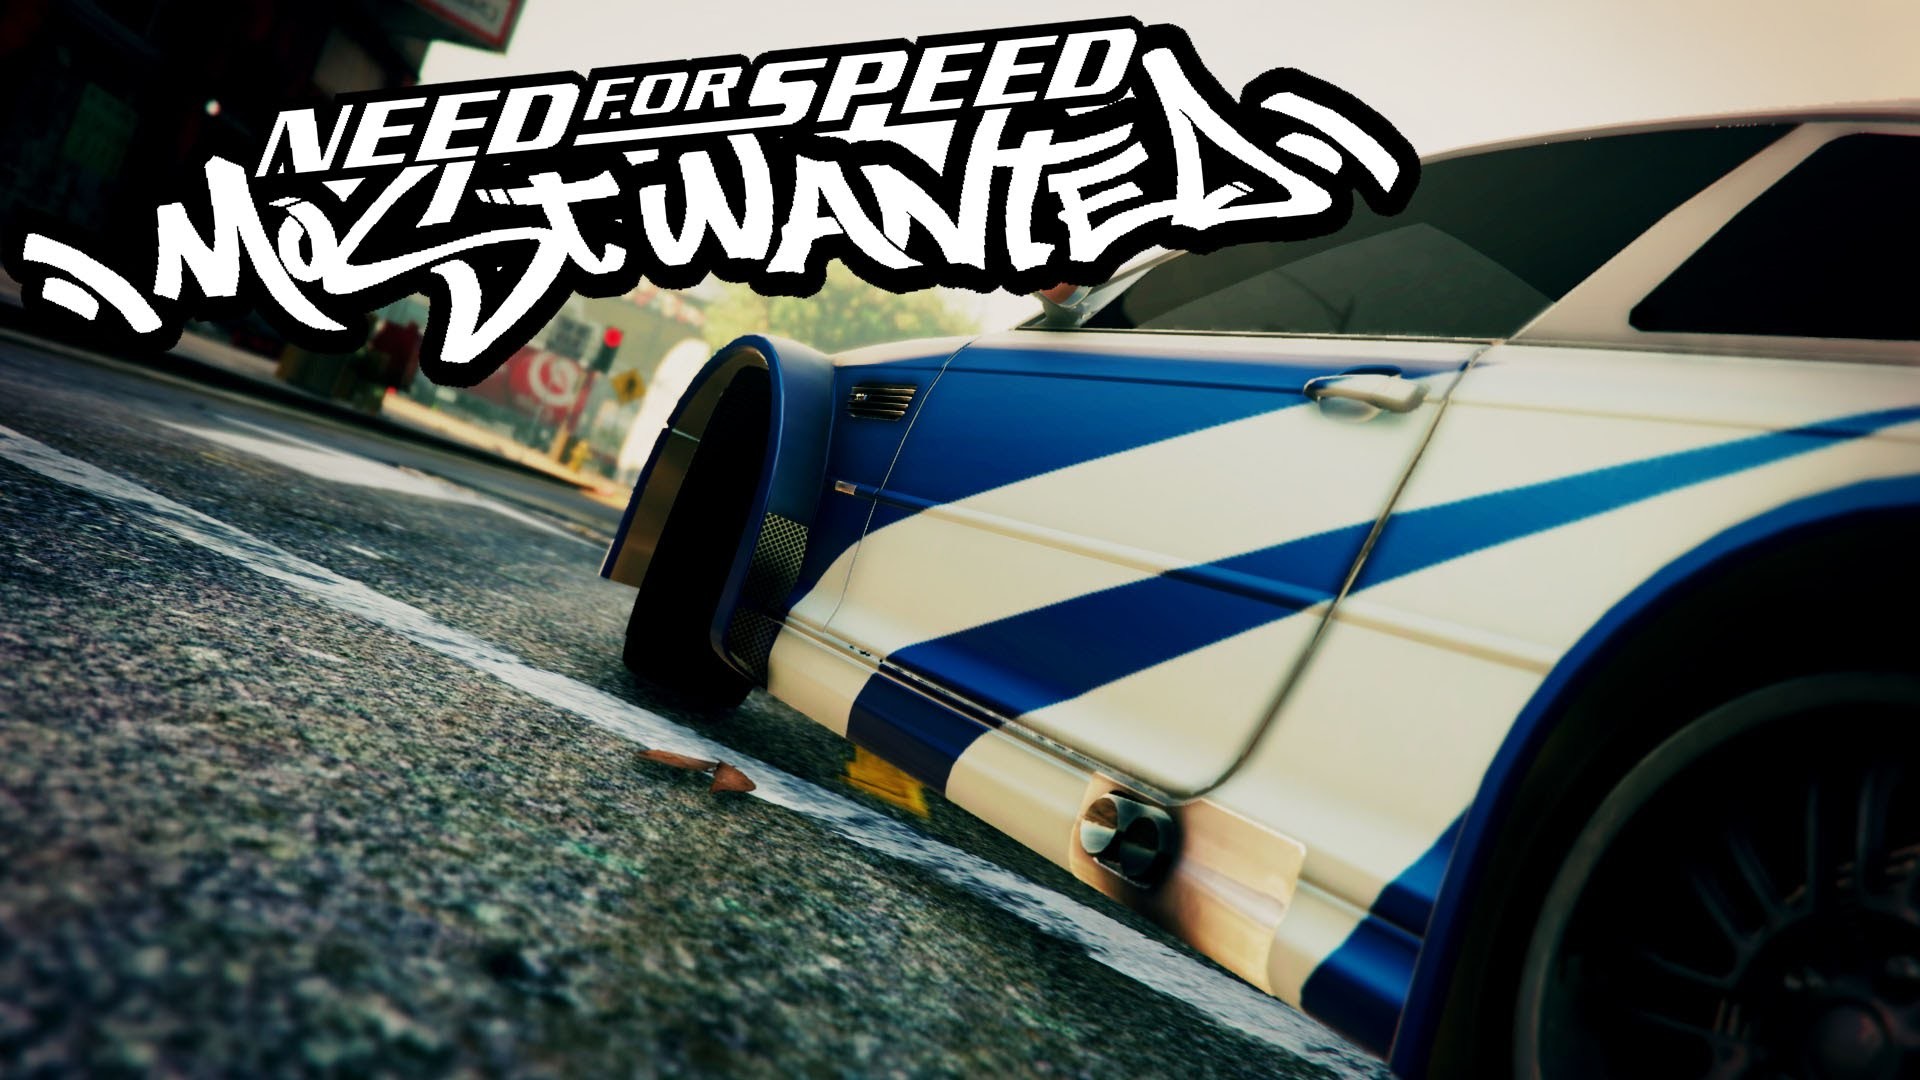 1920x1080 Need For Speed: Most Wanted HD Wallpaper 23 - 1920 X 1080